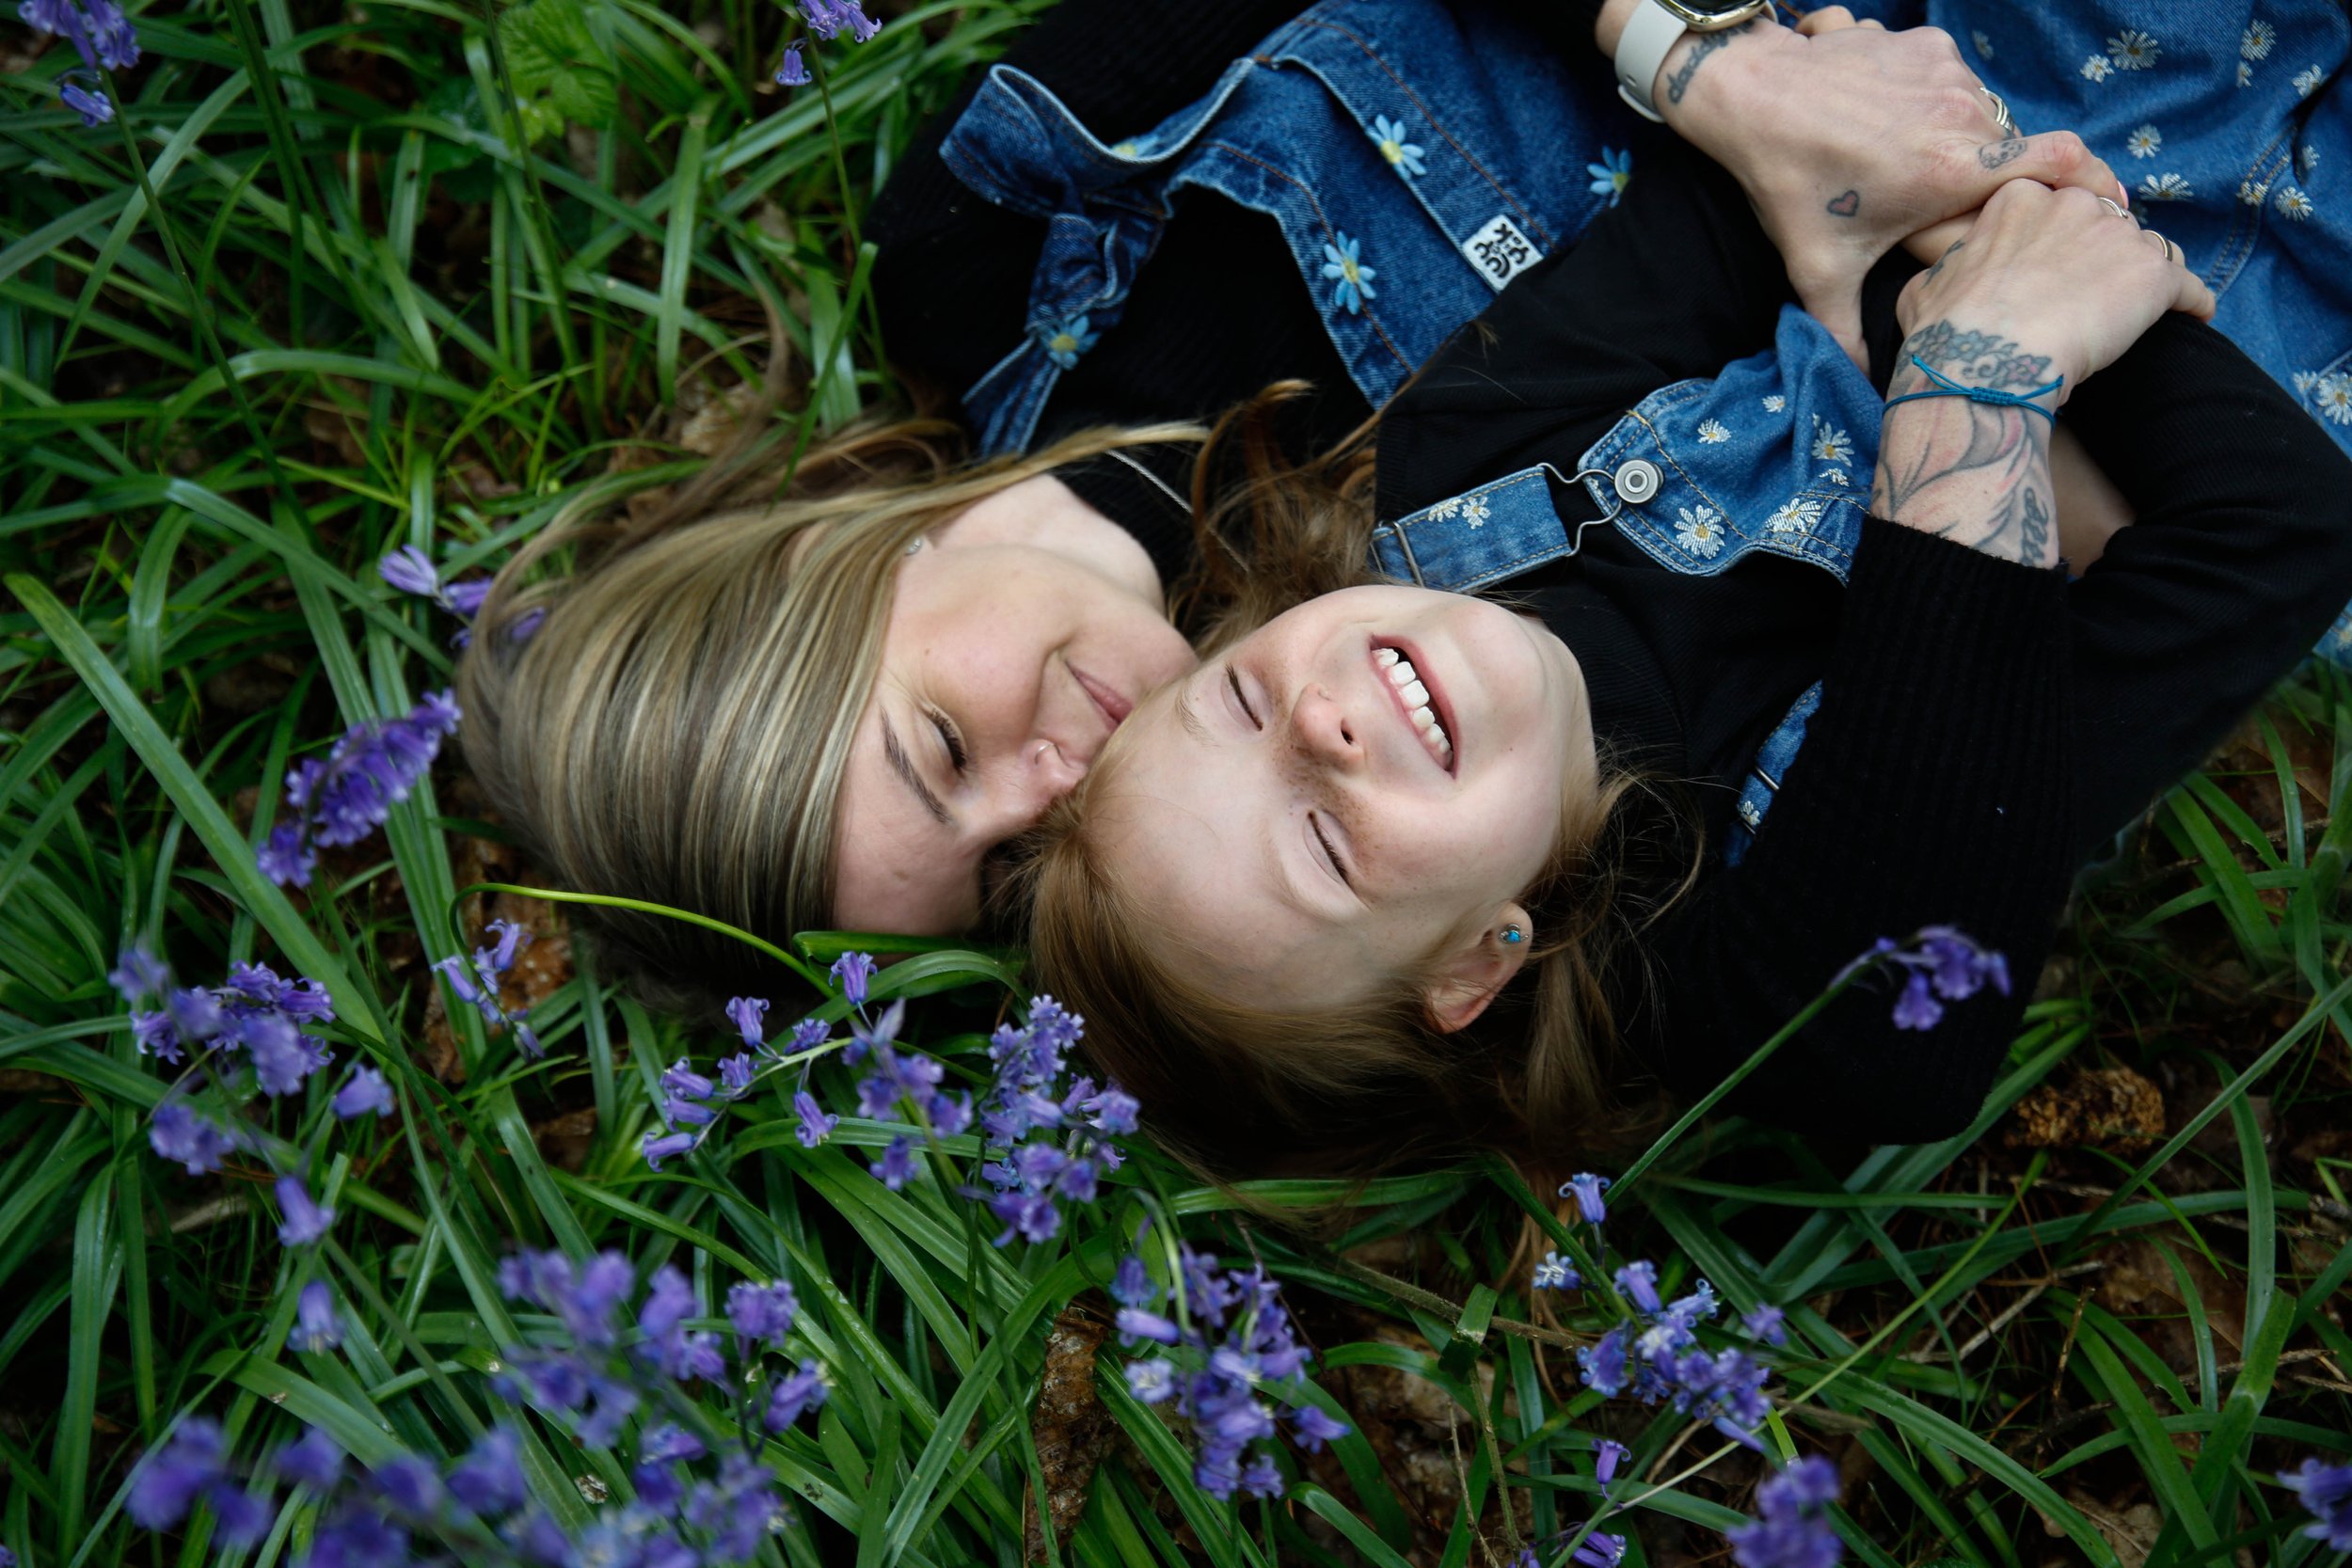 MUM AND DAUGHTER PHOTO SHOOT IN THE BLUEBELLS | BERKSHIRE PORTRAIT SHOOTS15 choice .JPG